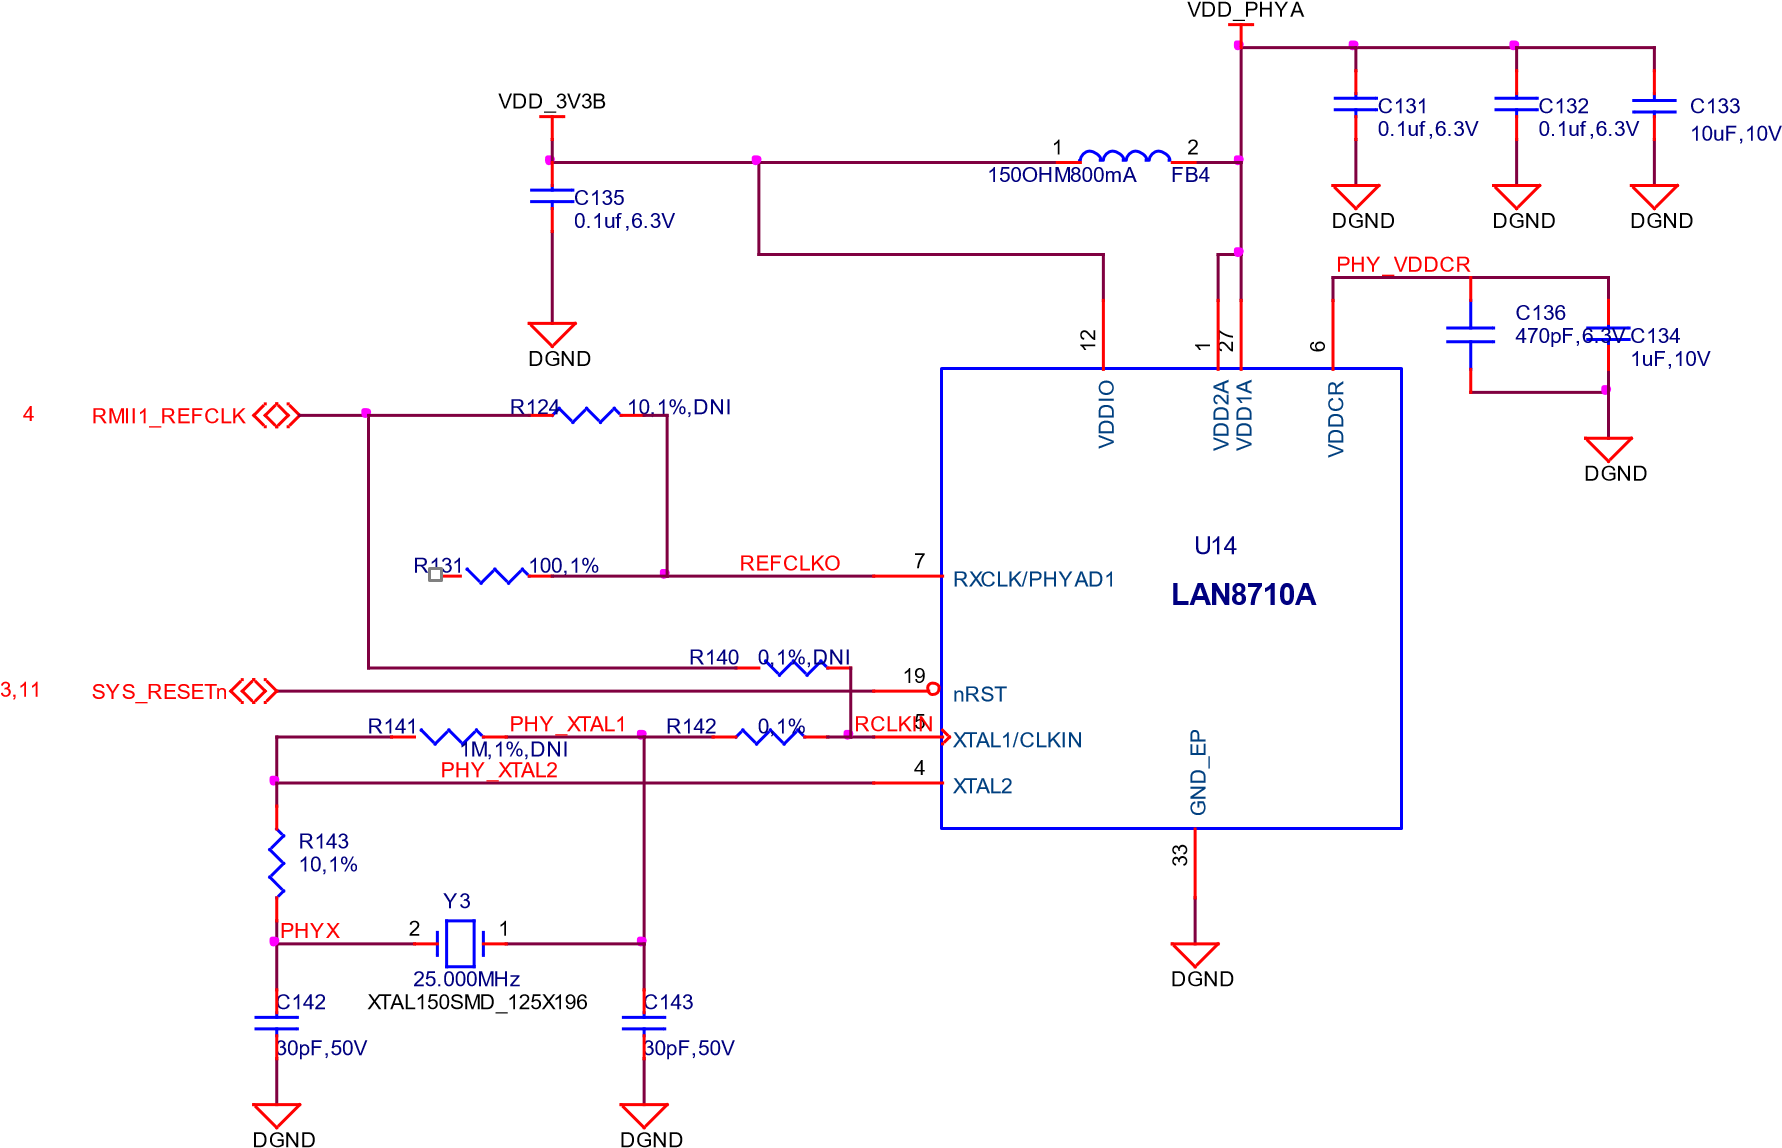 Ethernet PHY, Power, Reset, and Clocks